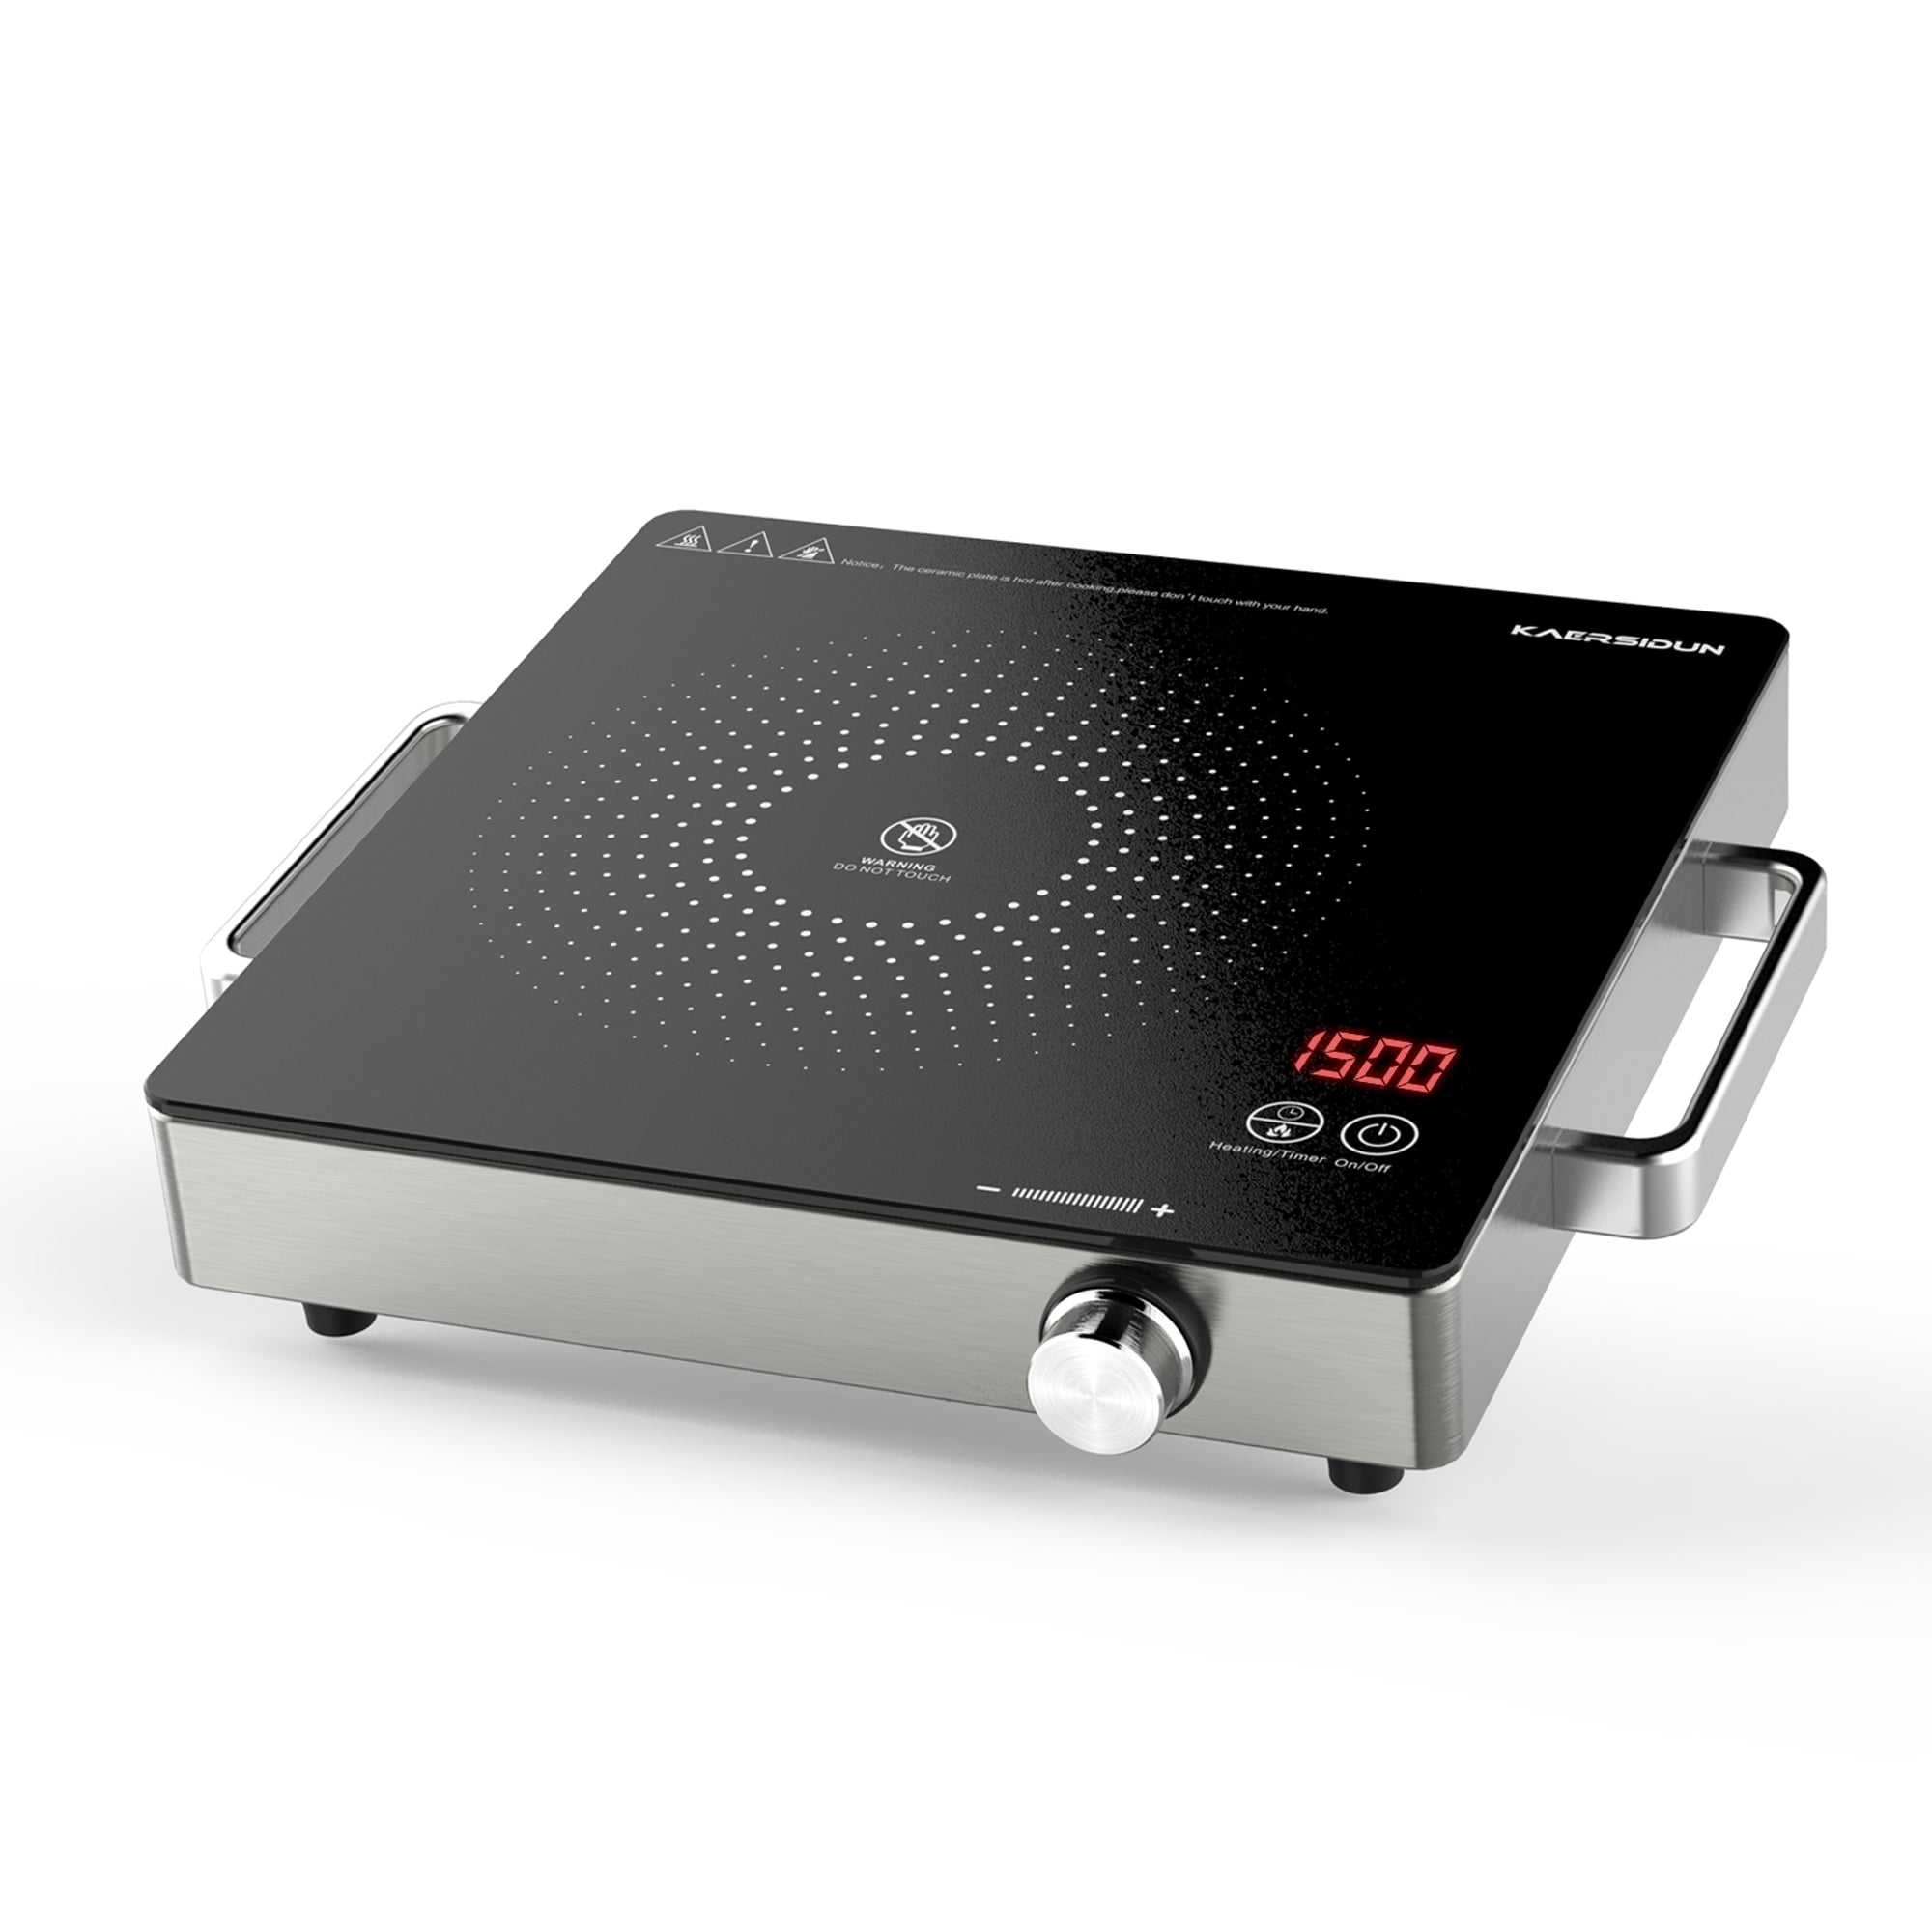 Rent the Induction Cooktop Electric Single Burner